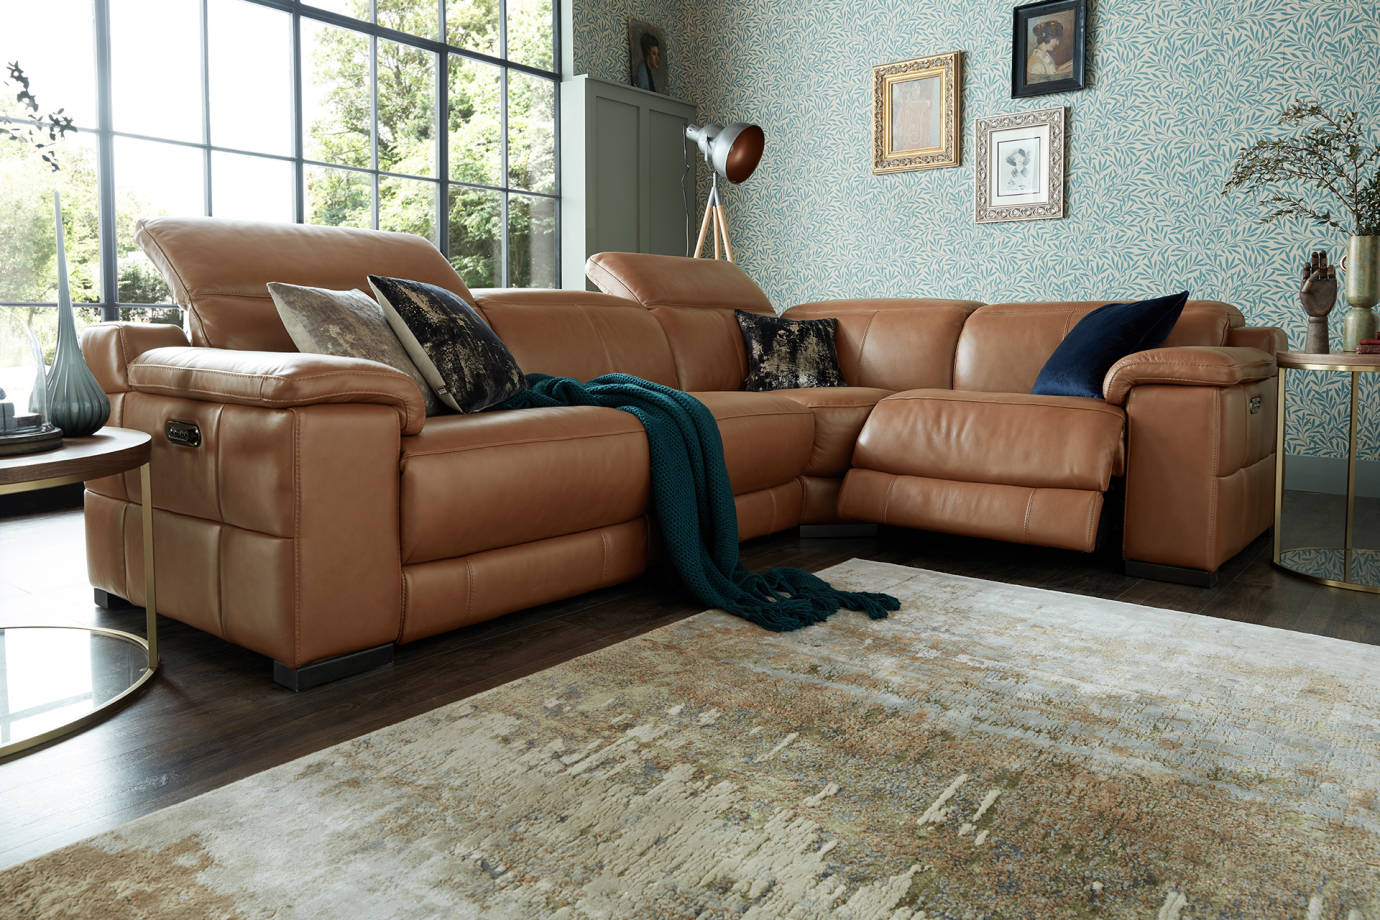 Leather Sofas Sofology, Light Tan Leather Couch Set